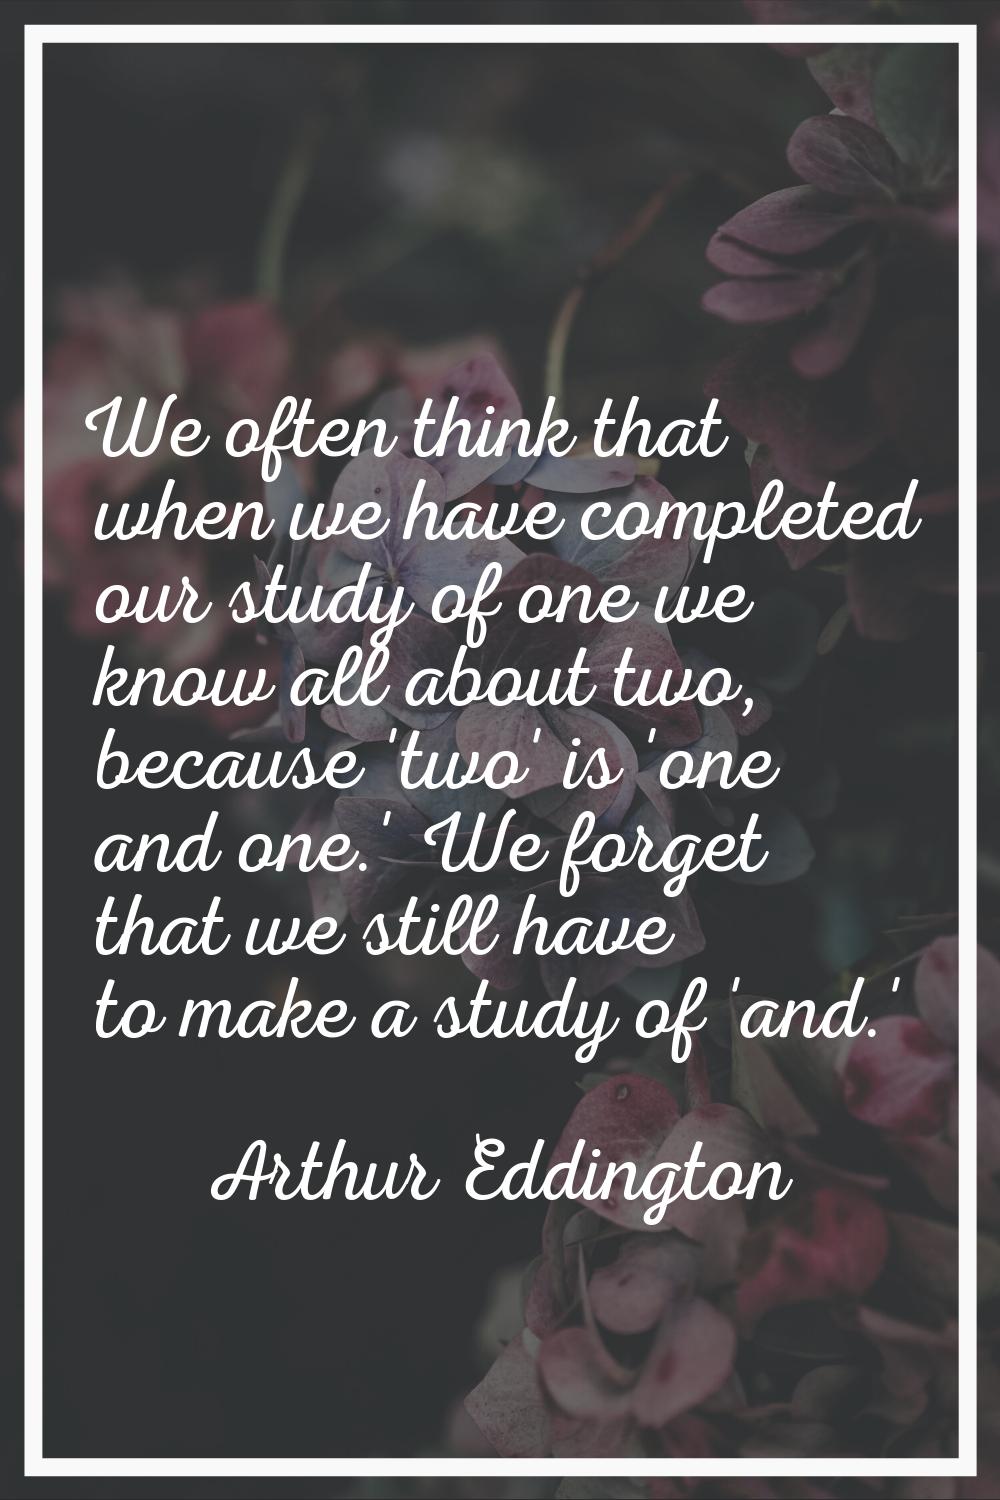 We often think that when we have completed our study of one we know all about two, because 'two' is